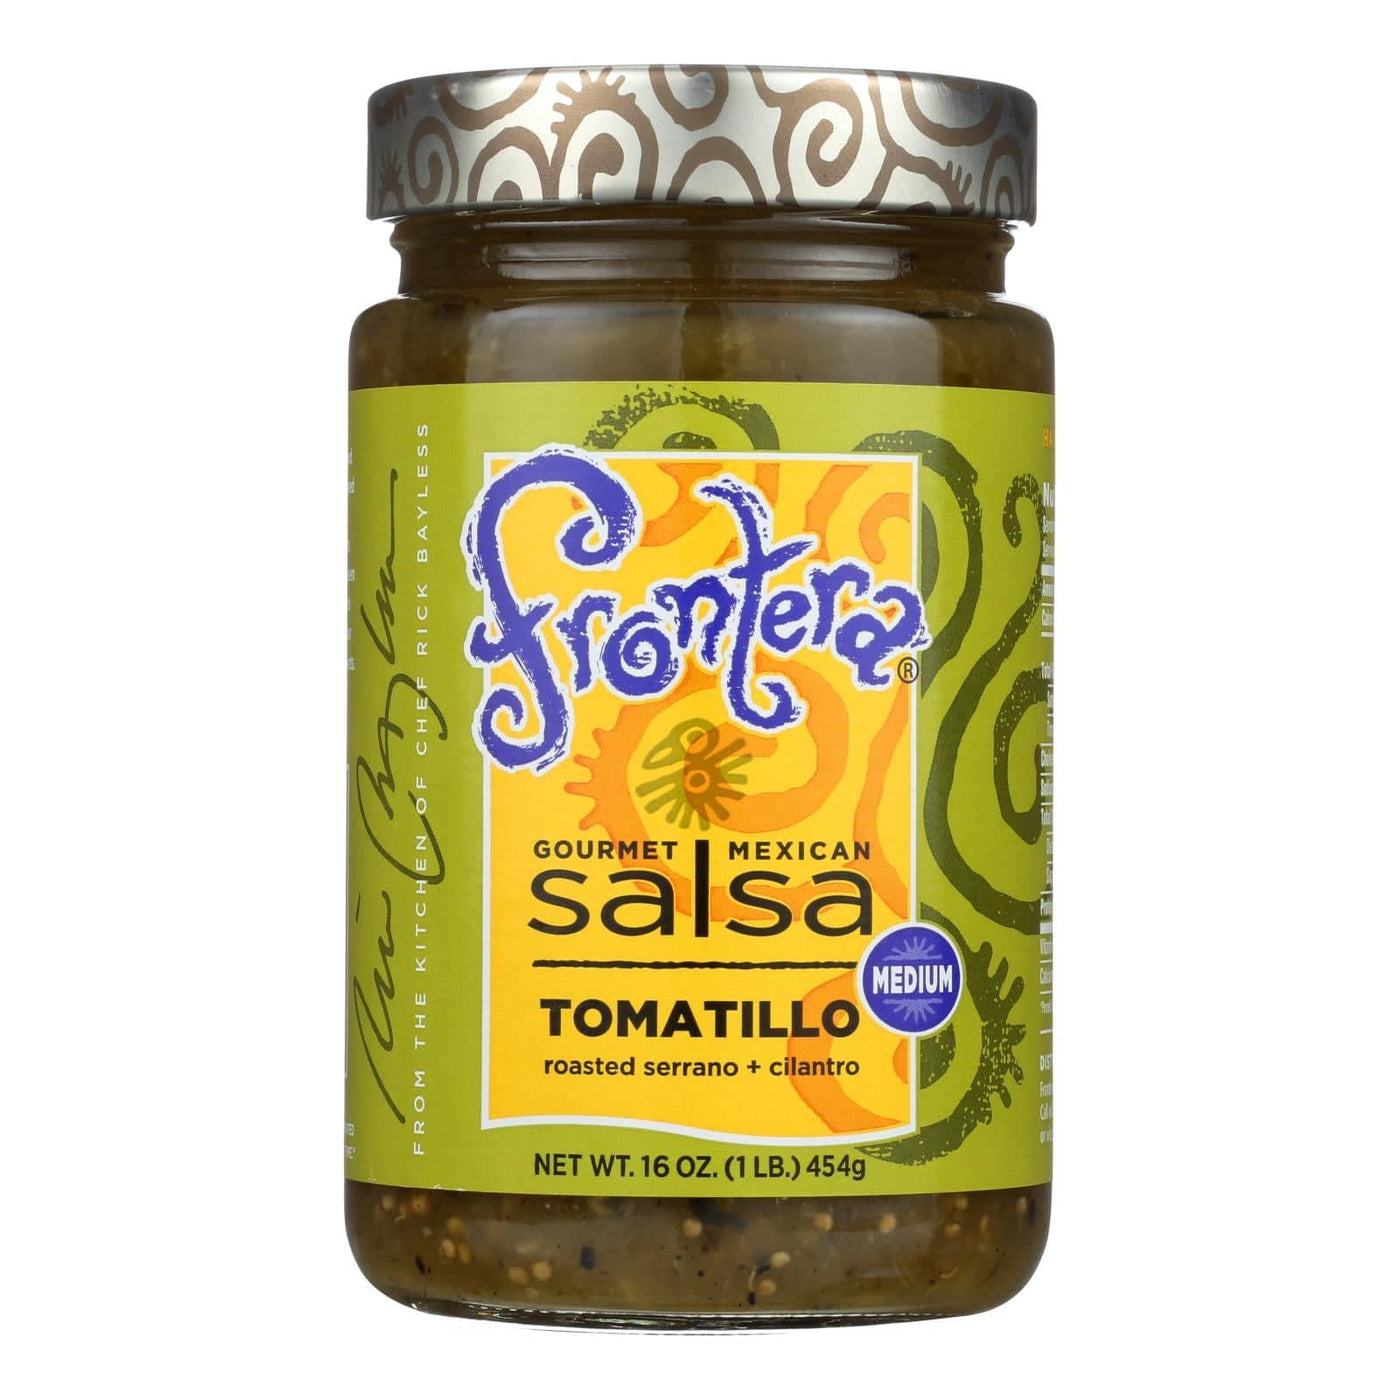 Buy Frontera Foods Tomatillo Salsa - Tomatillo - Case Of 6 - 16 Oz.  at OnlyNaturals.us